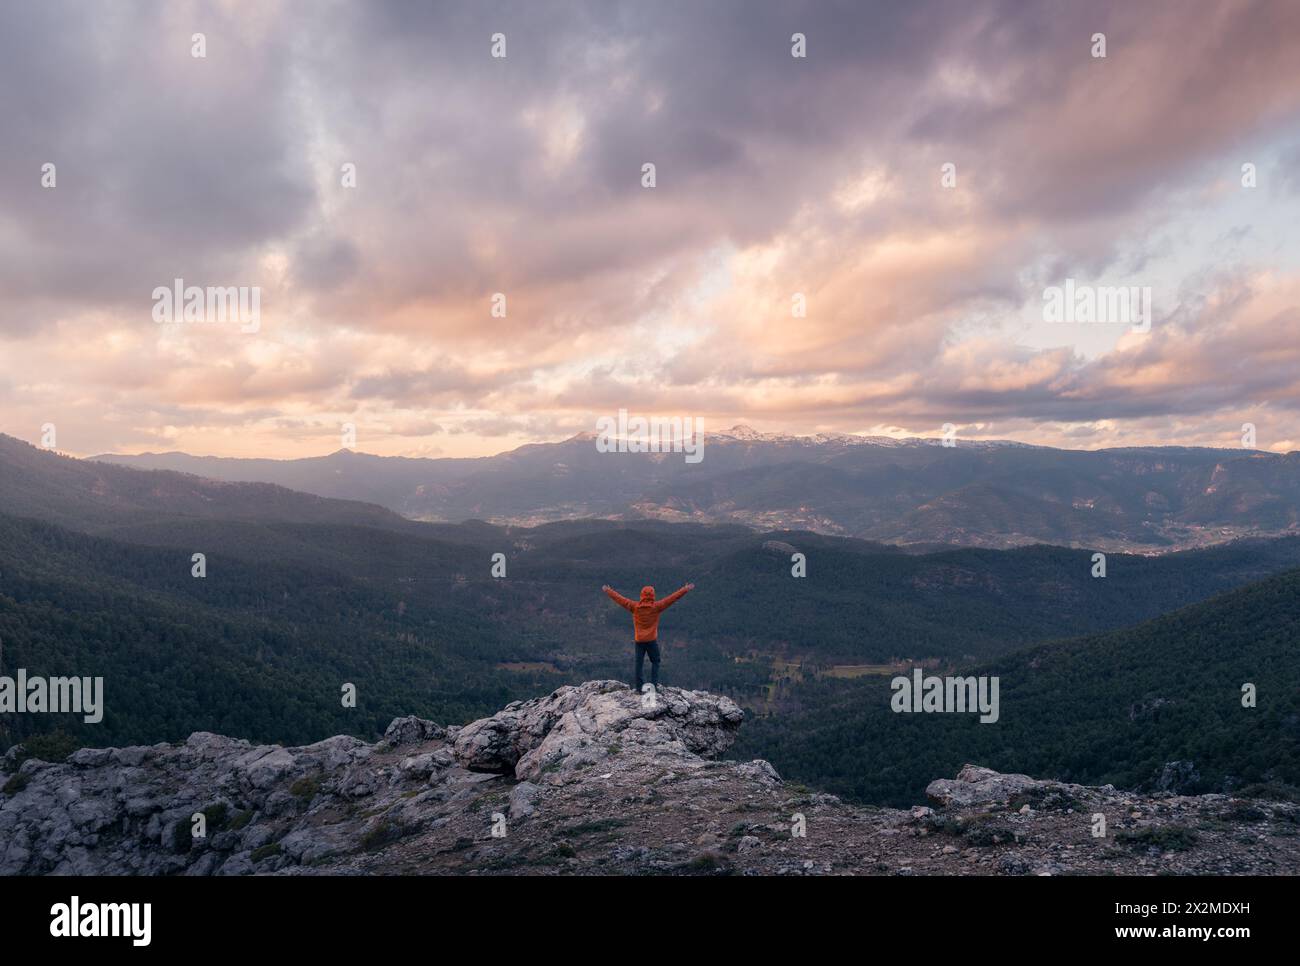 An adventurer stands with arms raised on a rocky peak, celebrating as the sunset paints the skies over the forests and mountains of Rio Mundo in Casti Stock Photo